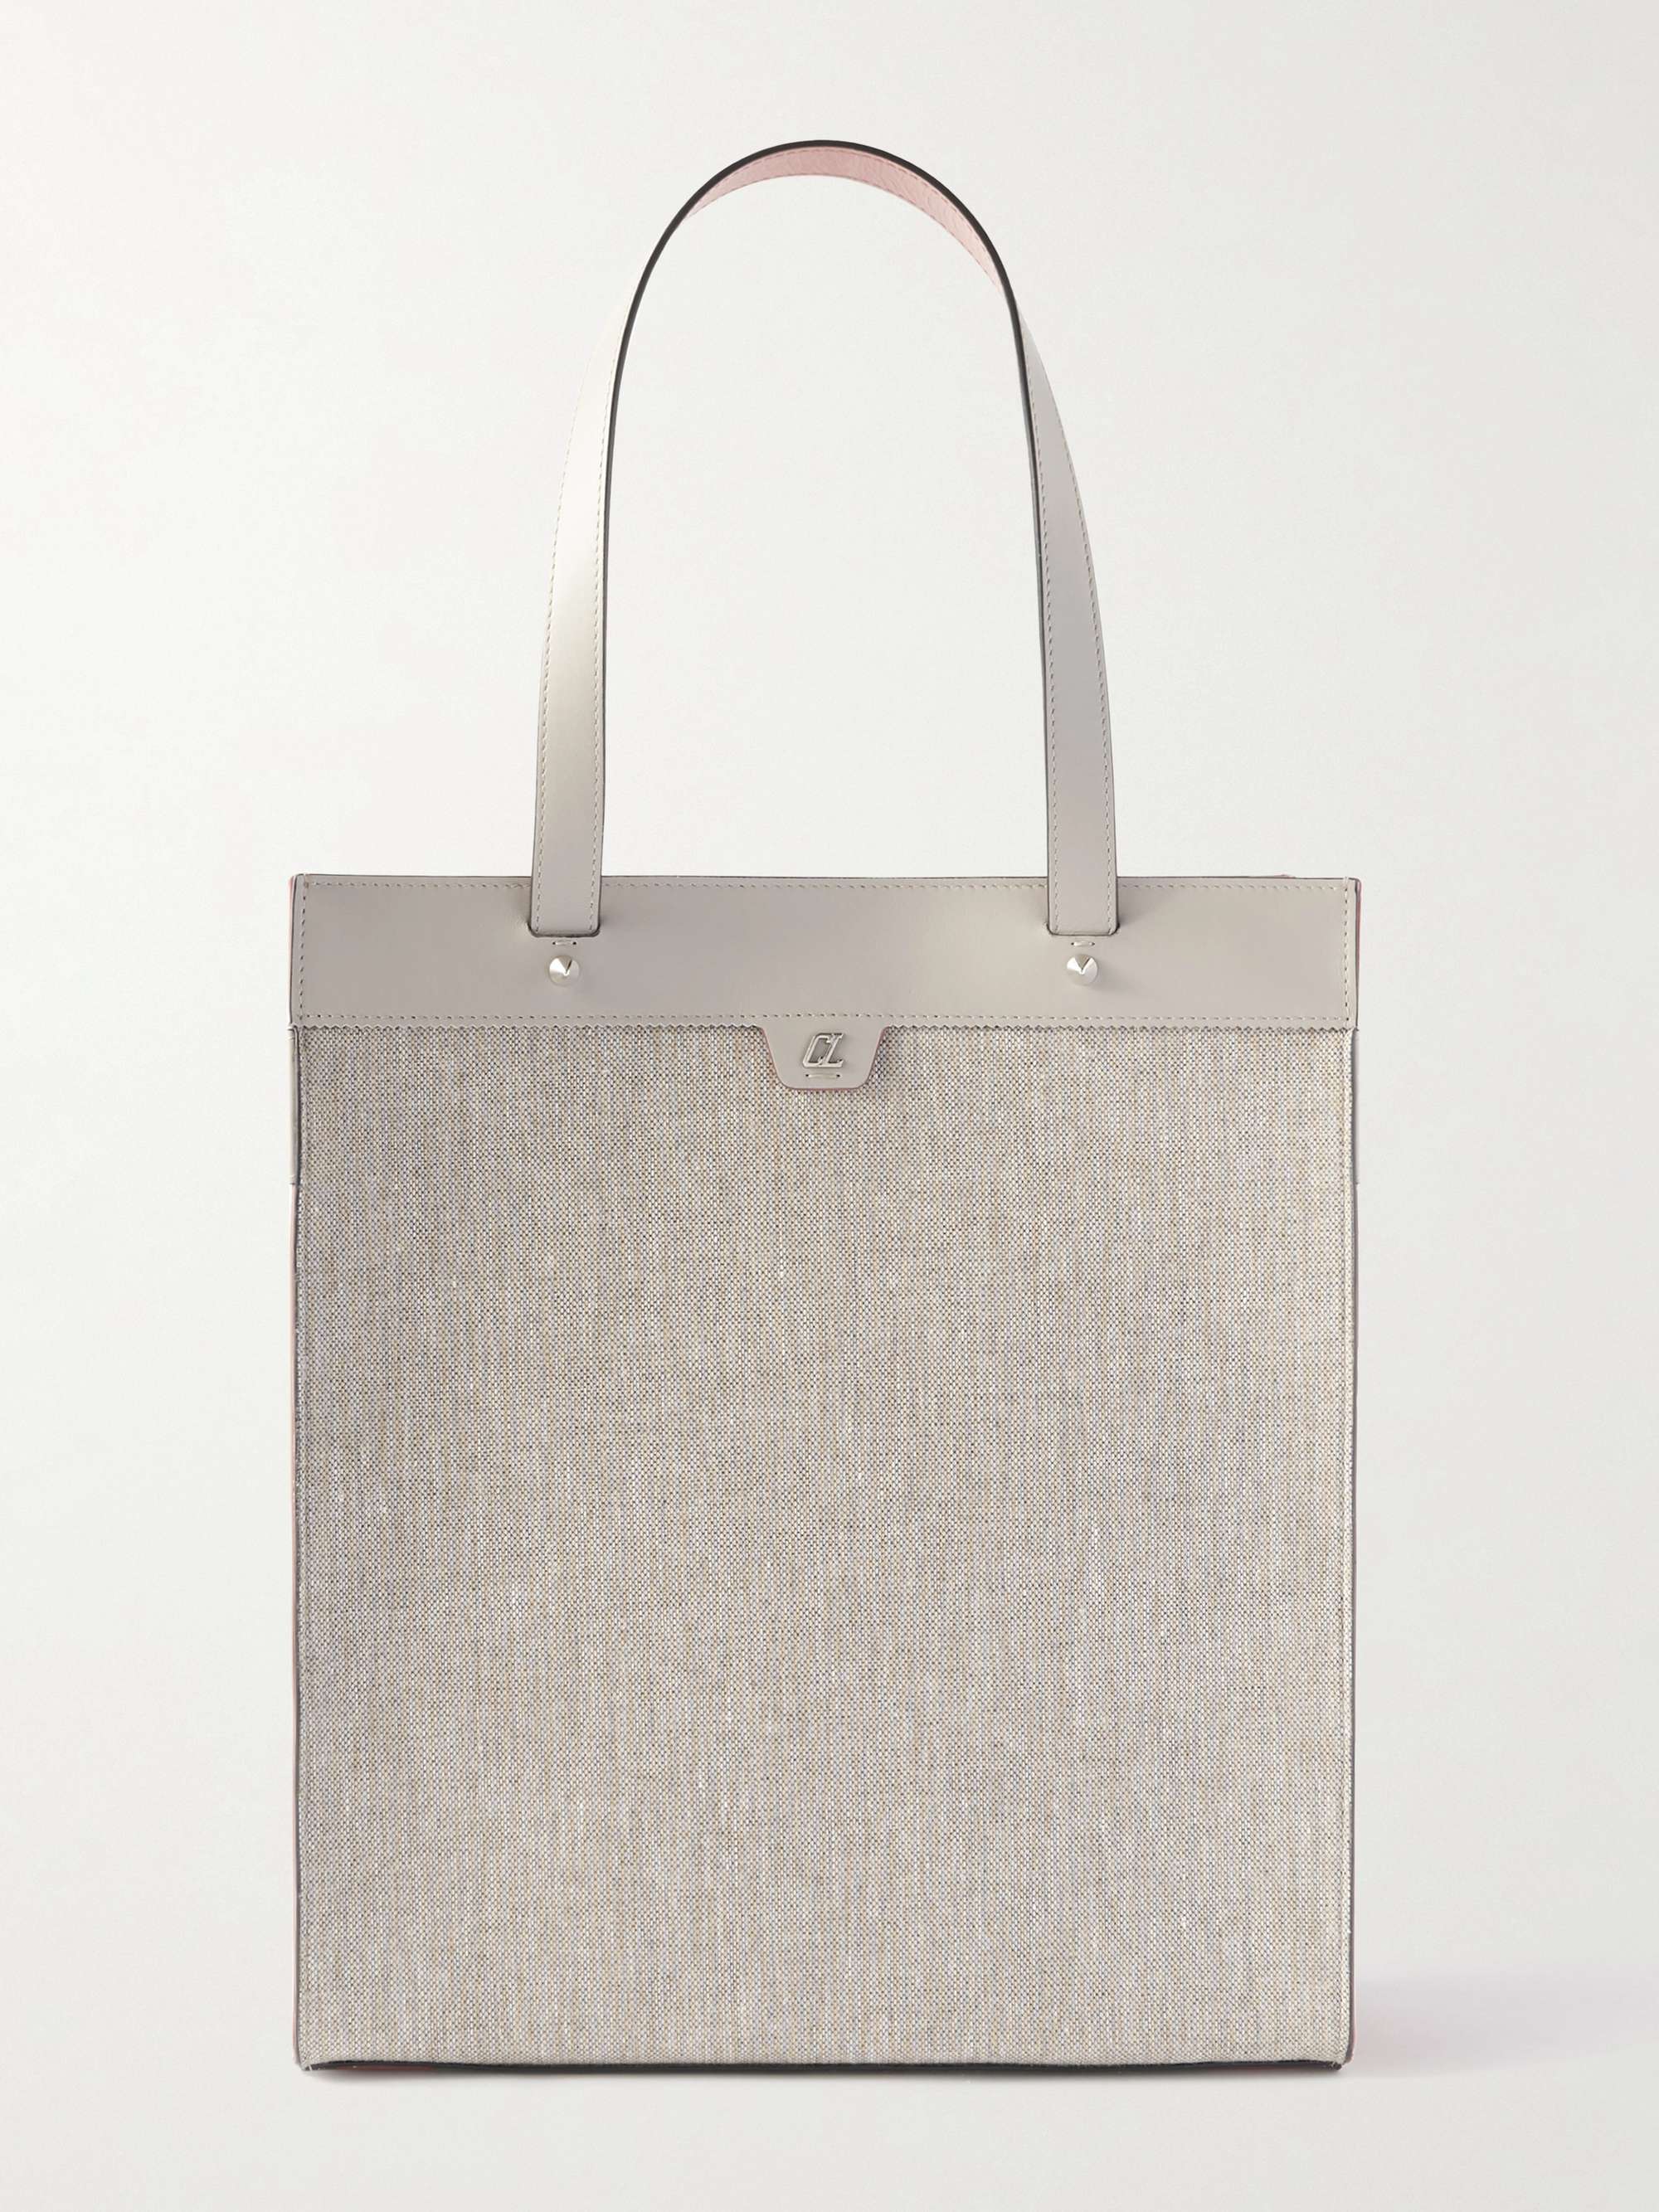 Christian Louboutin - Men - logo-embossed Canvas and Leather Tote Bag Neutrals